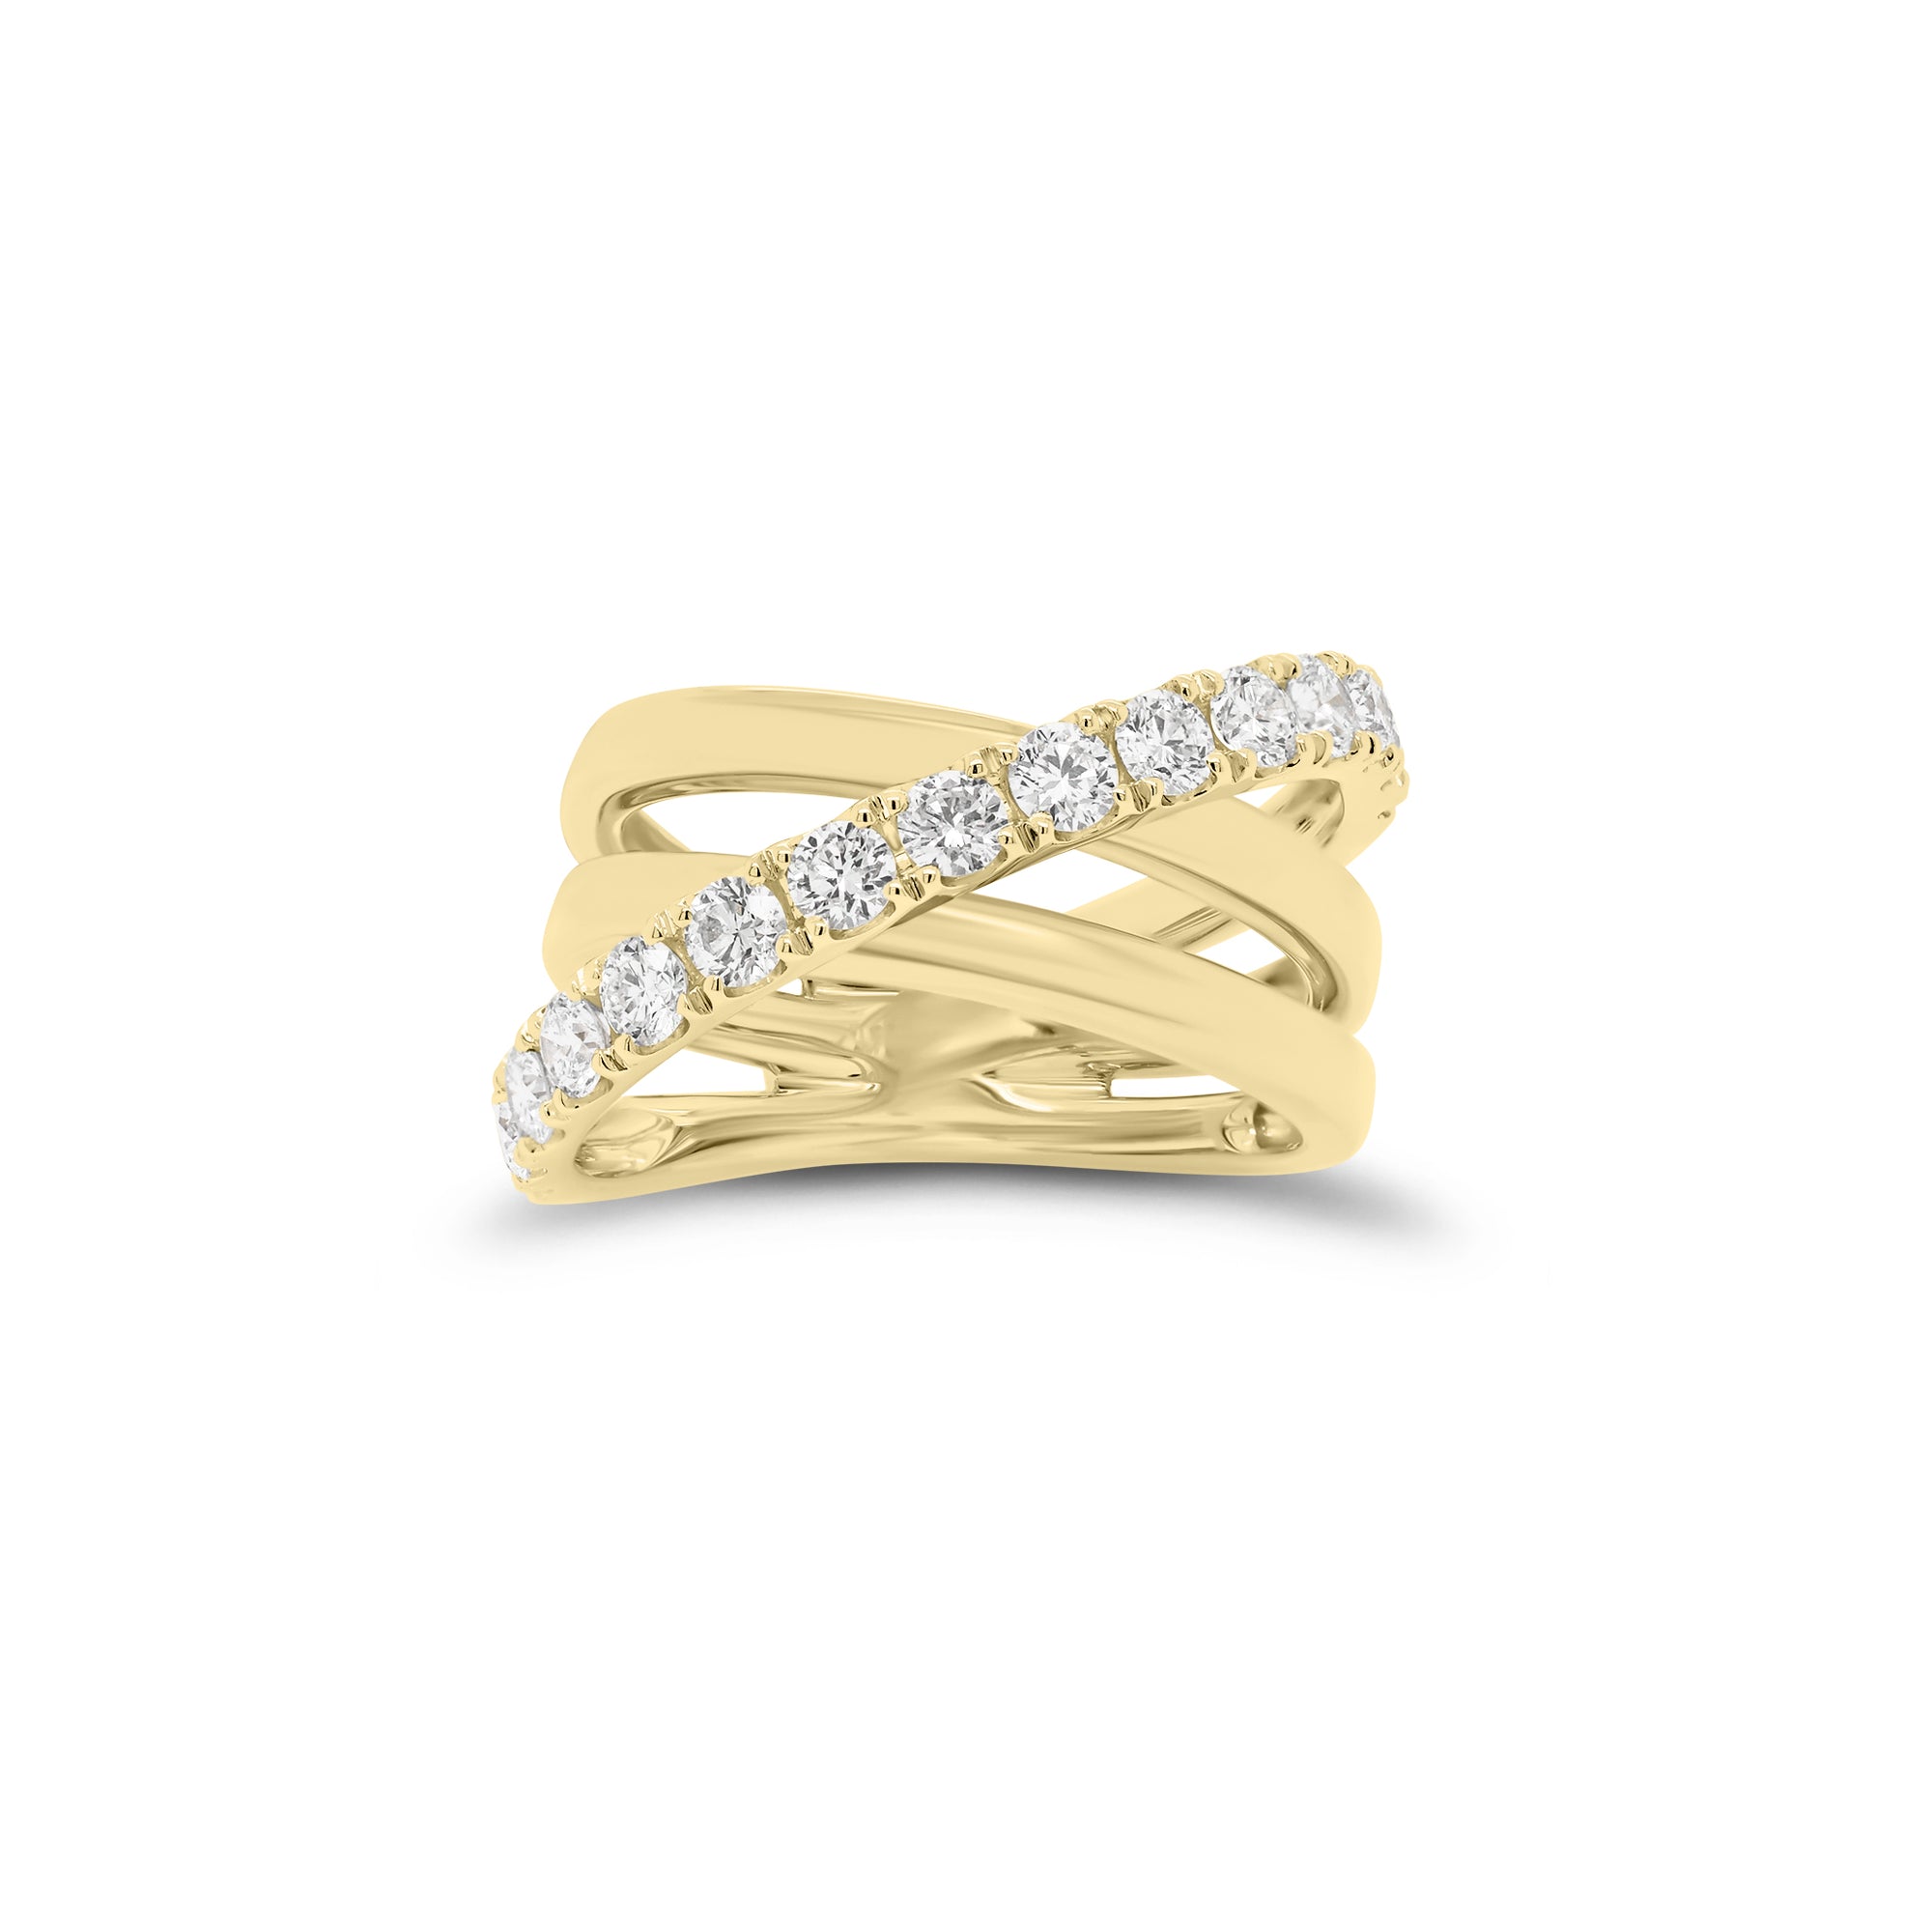 Diamond & gold multi-band crossover ring - 18K gold weighing 7.34 grams  - 15 round diamonds weighing 0.94 carats